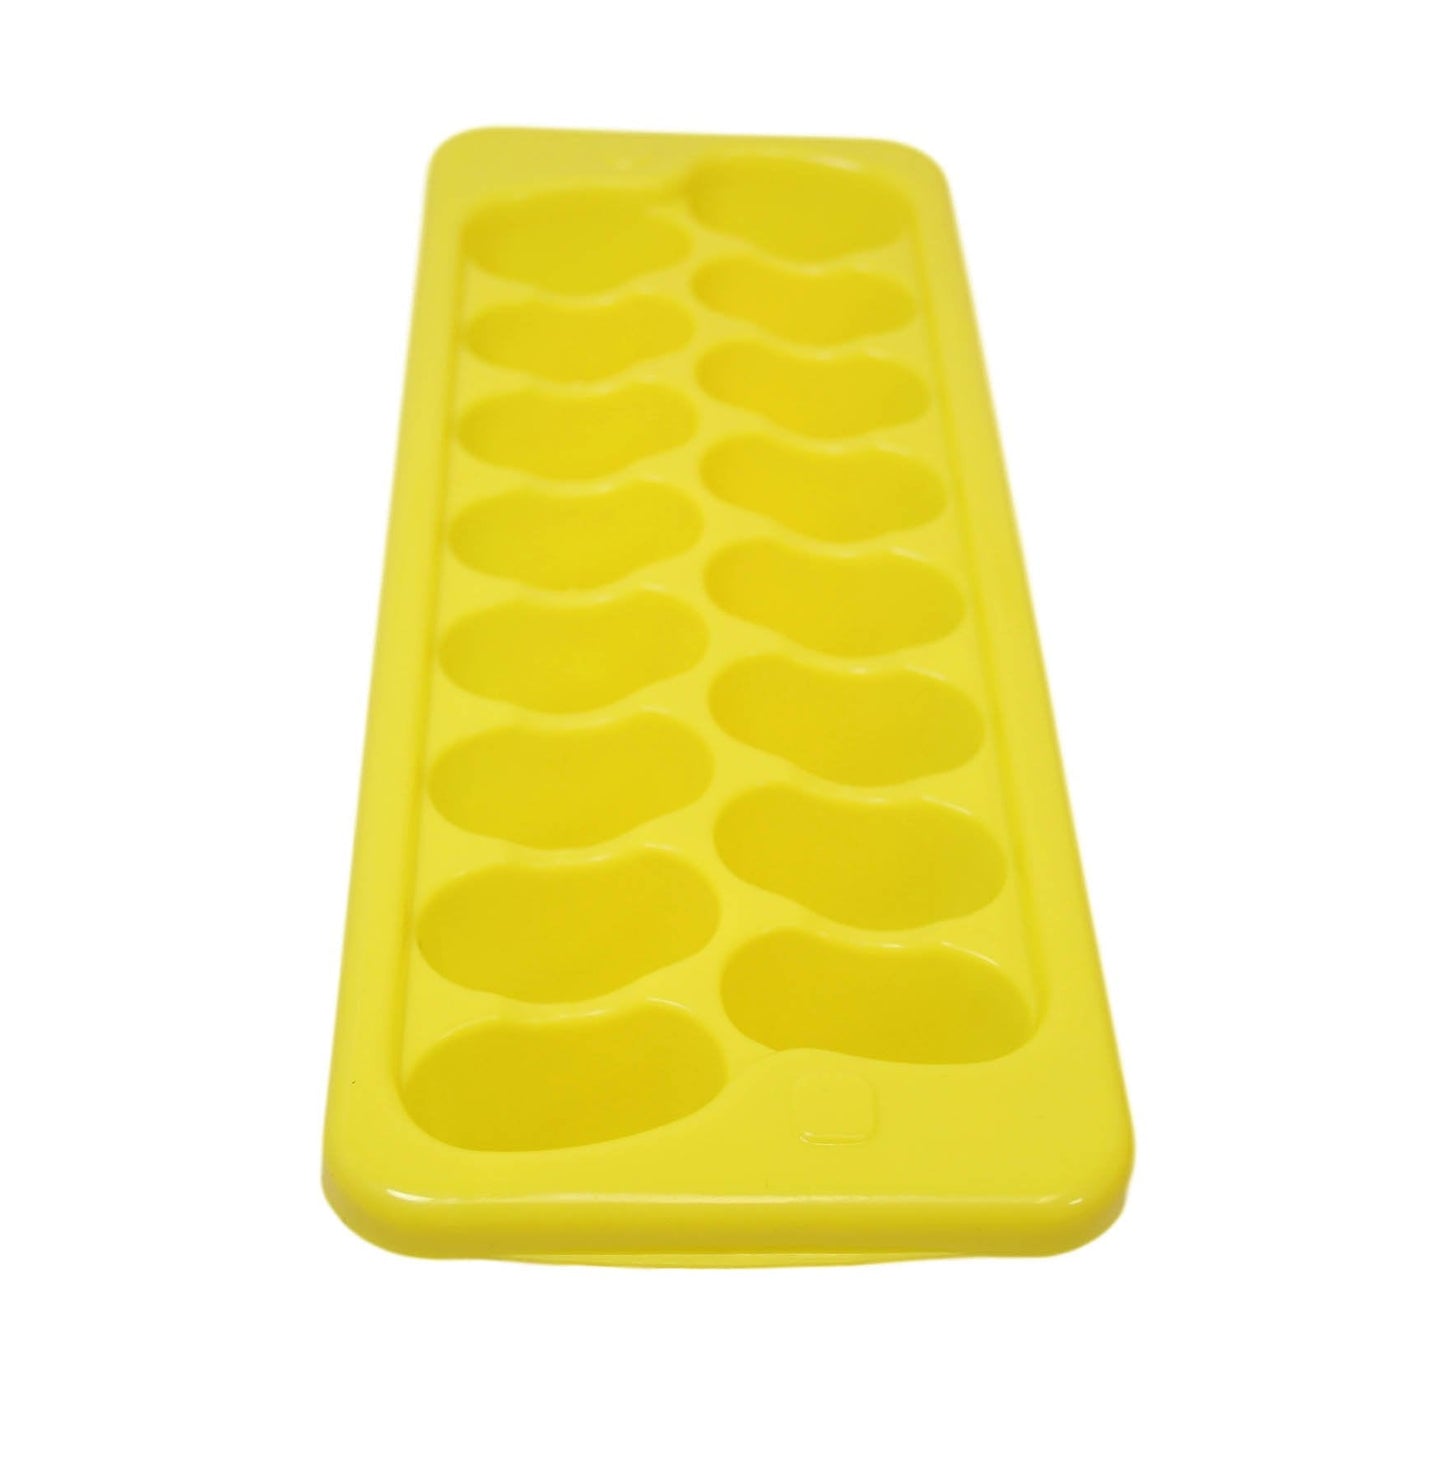 Plastic Ice Cube Tray 29 x 12 cm Pack of 2 Assorted Colours 9676 (Parcel Rate)